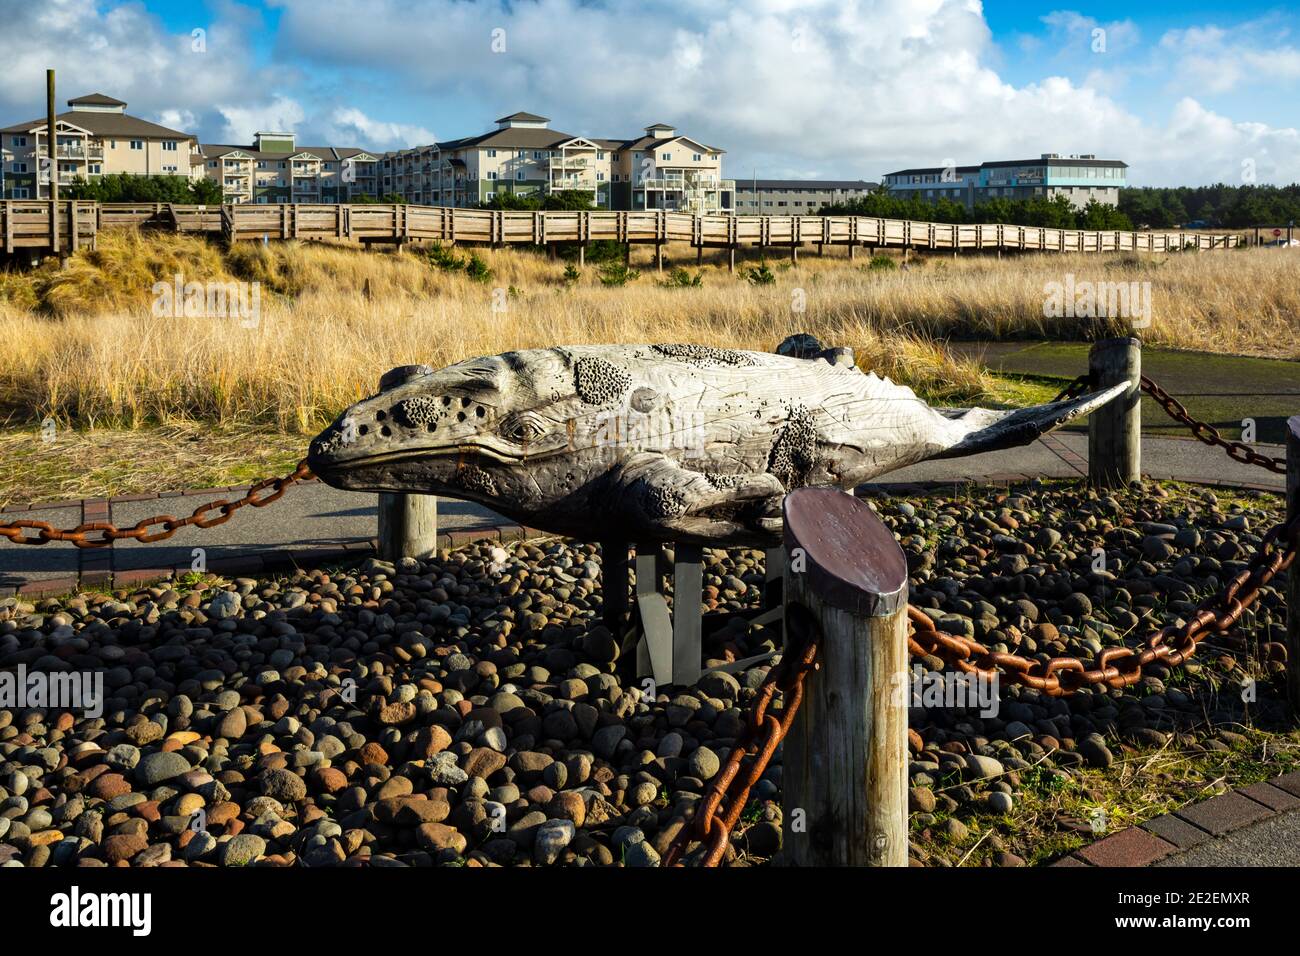 WA19134-00...WASHINGTON - Carving of a Grey Whale located along the waterfront Discovery Trail in the tourist town of Long Beach. Stock Photo